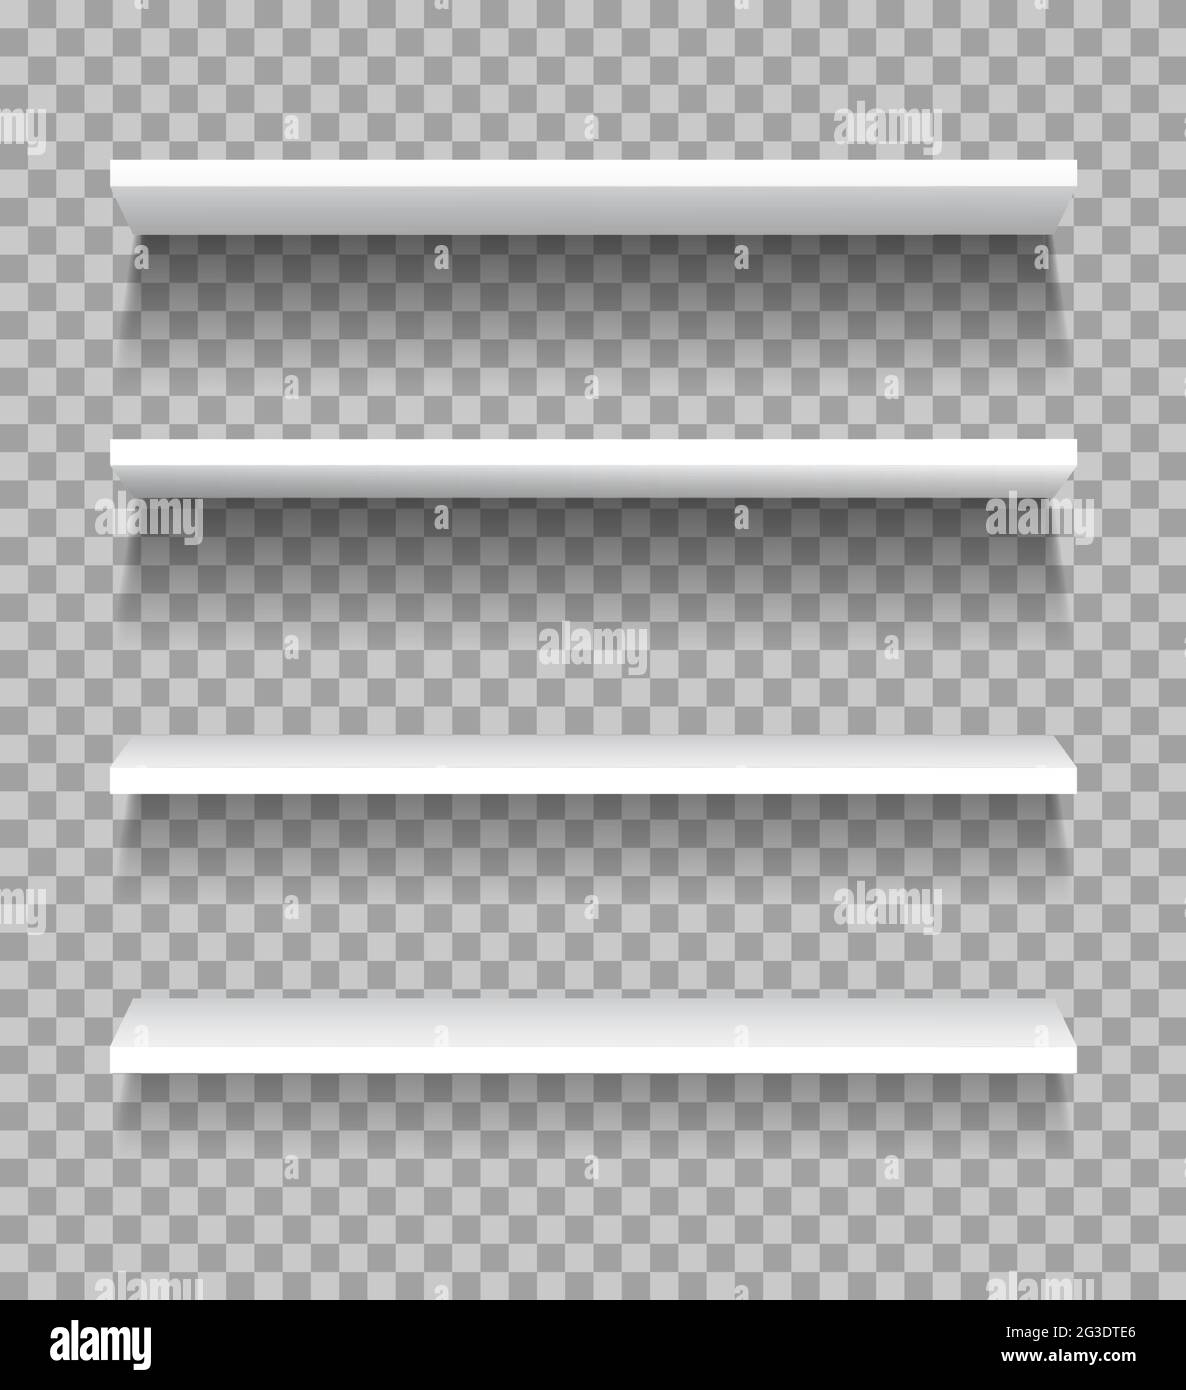 White shelves. Empty showcase display, product shelving for exhibitions. Realistic bookshelf rack, supermarket store shelf vector mockup. 3d furniture for selling products in retail shop Stock Vector